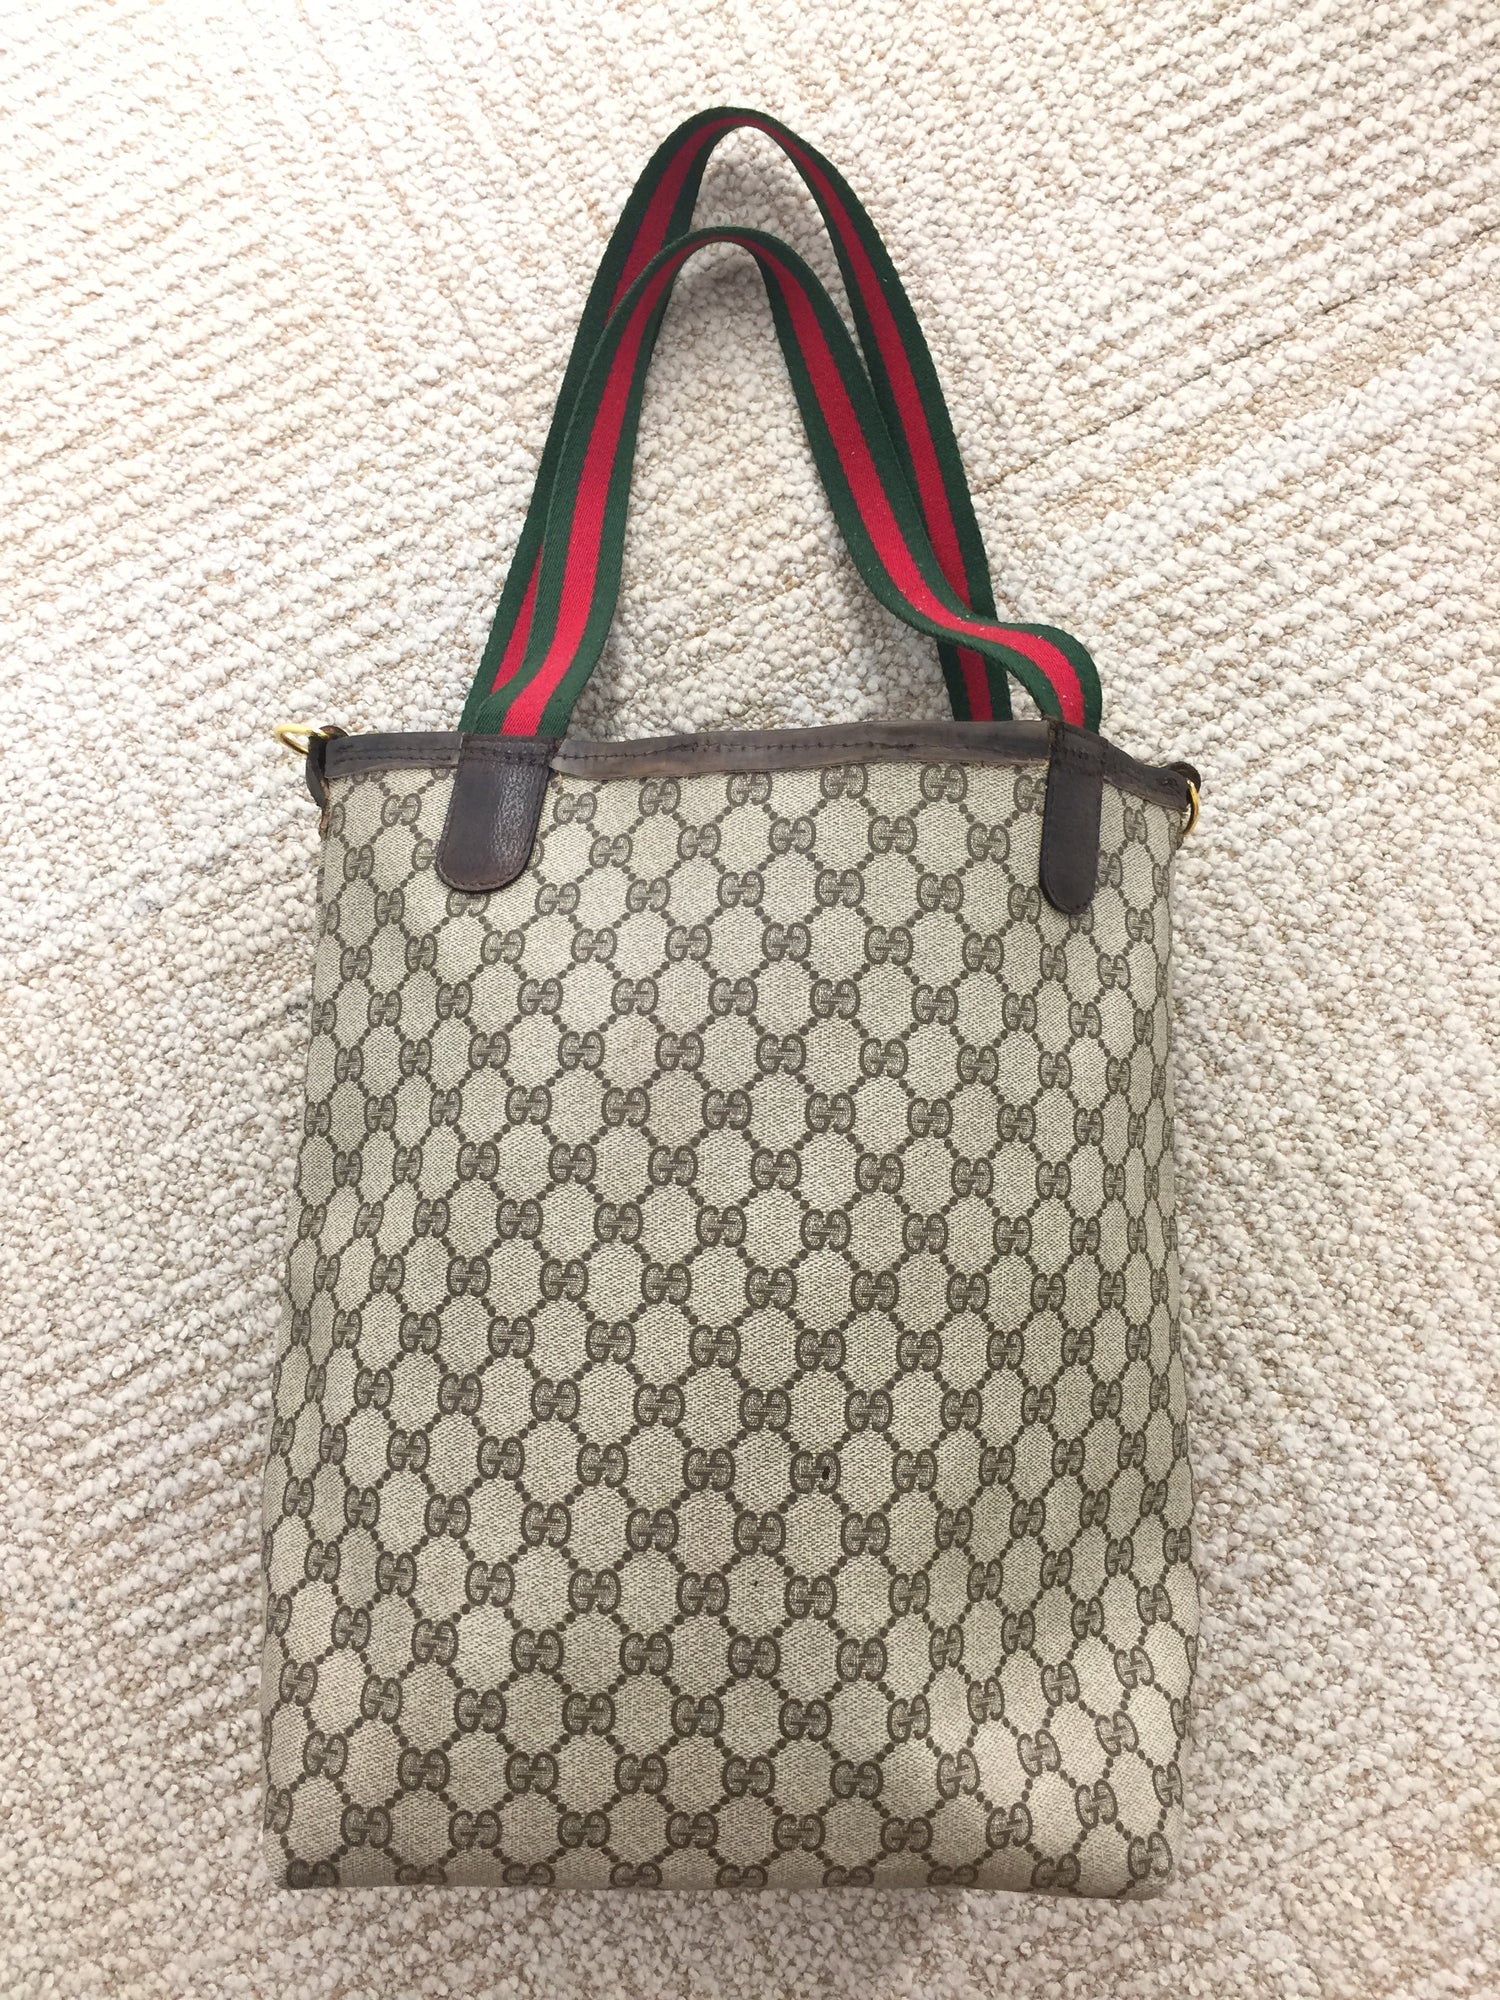 Pin on Gucci bags